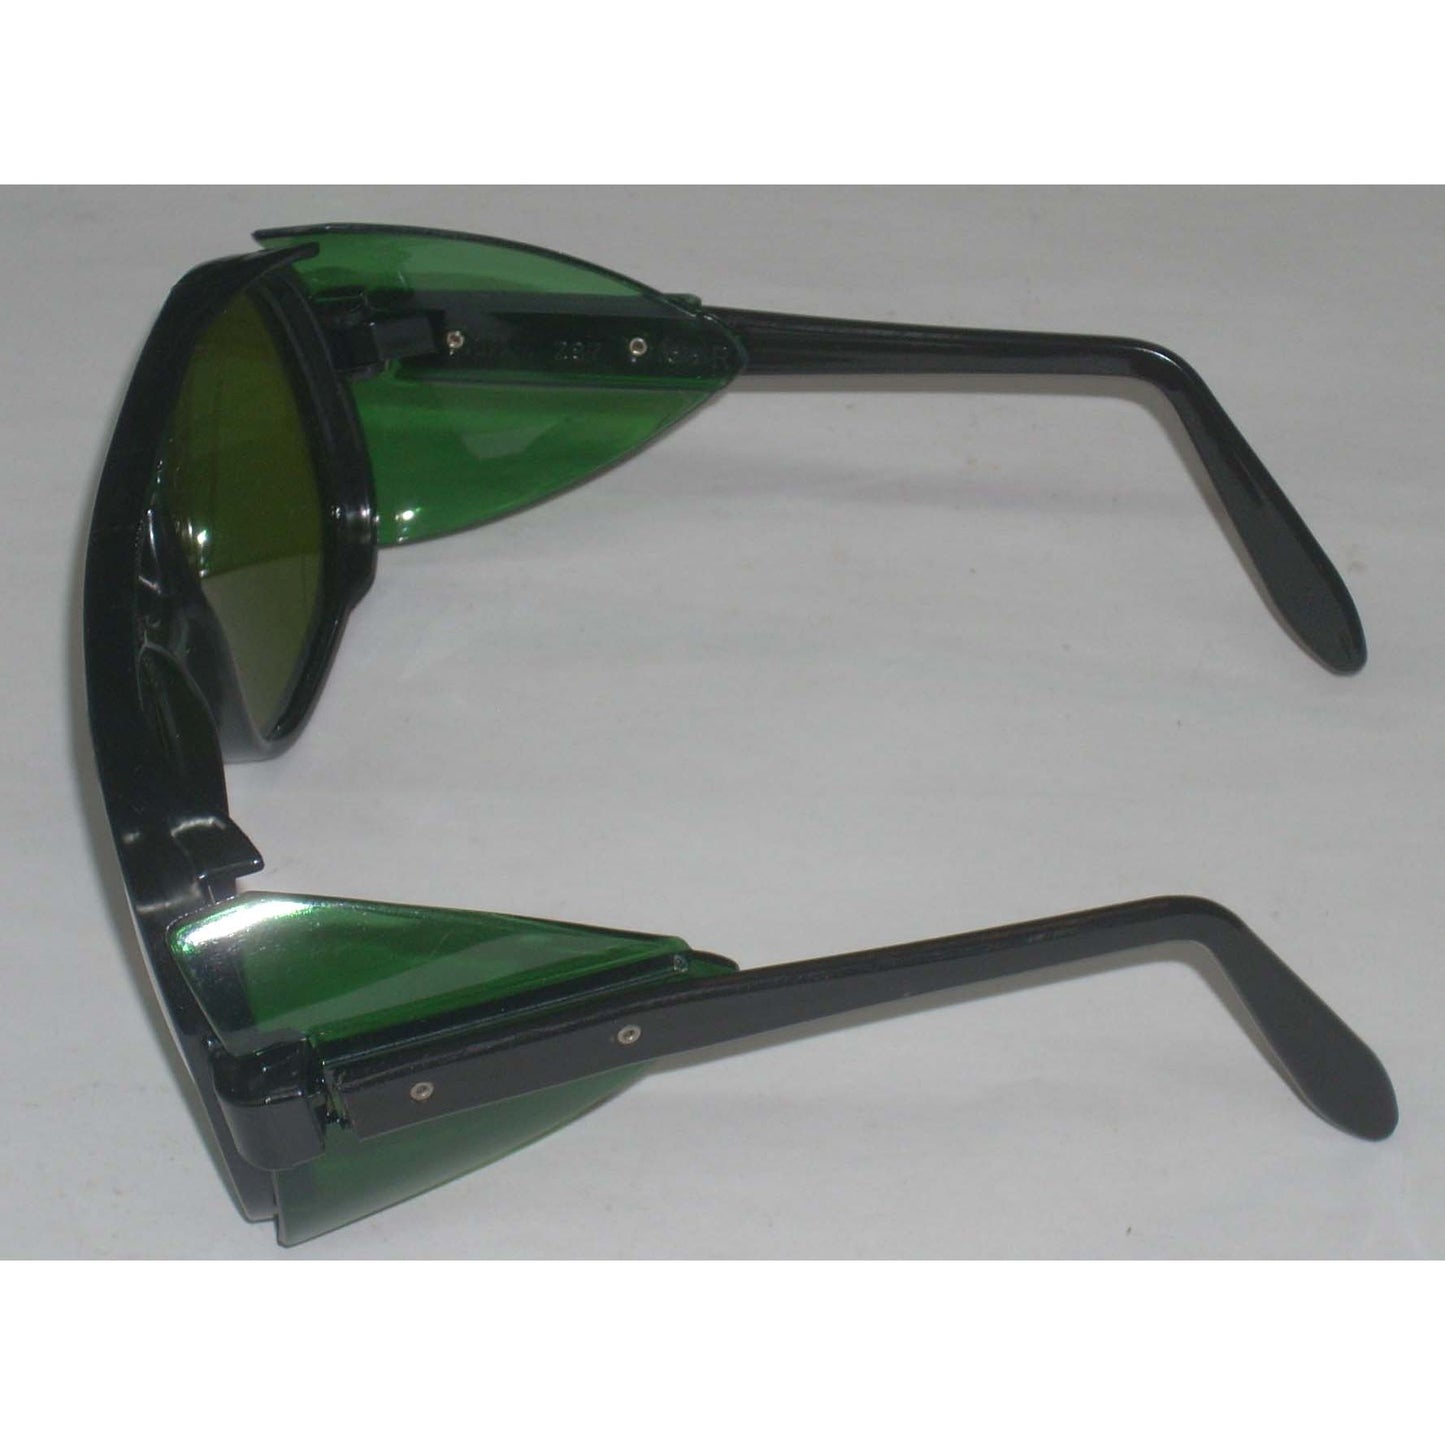 Century 47250 Green Tinted Safety Glasses w Side Shields